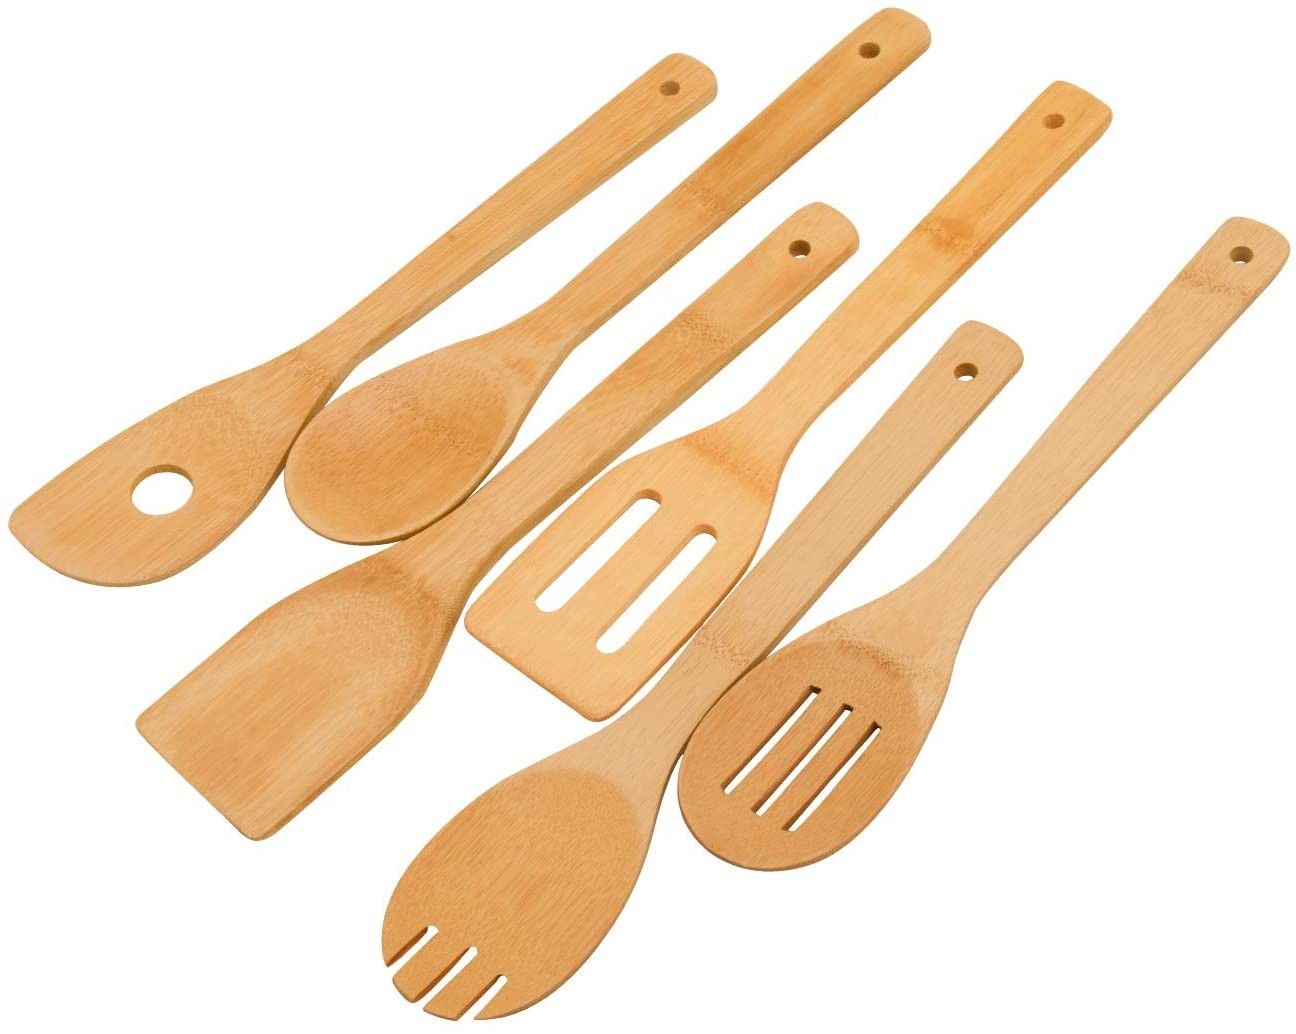 Wooden Spoons Cooking Utensils Set - 6 Pieces Bamboo Kitchen Spatulas for Non Stick Cookware